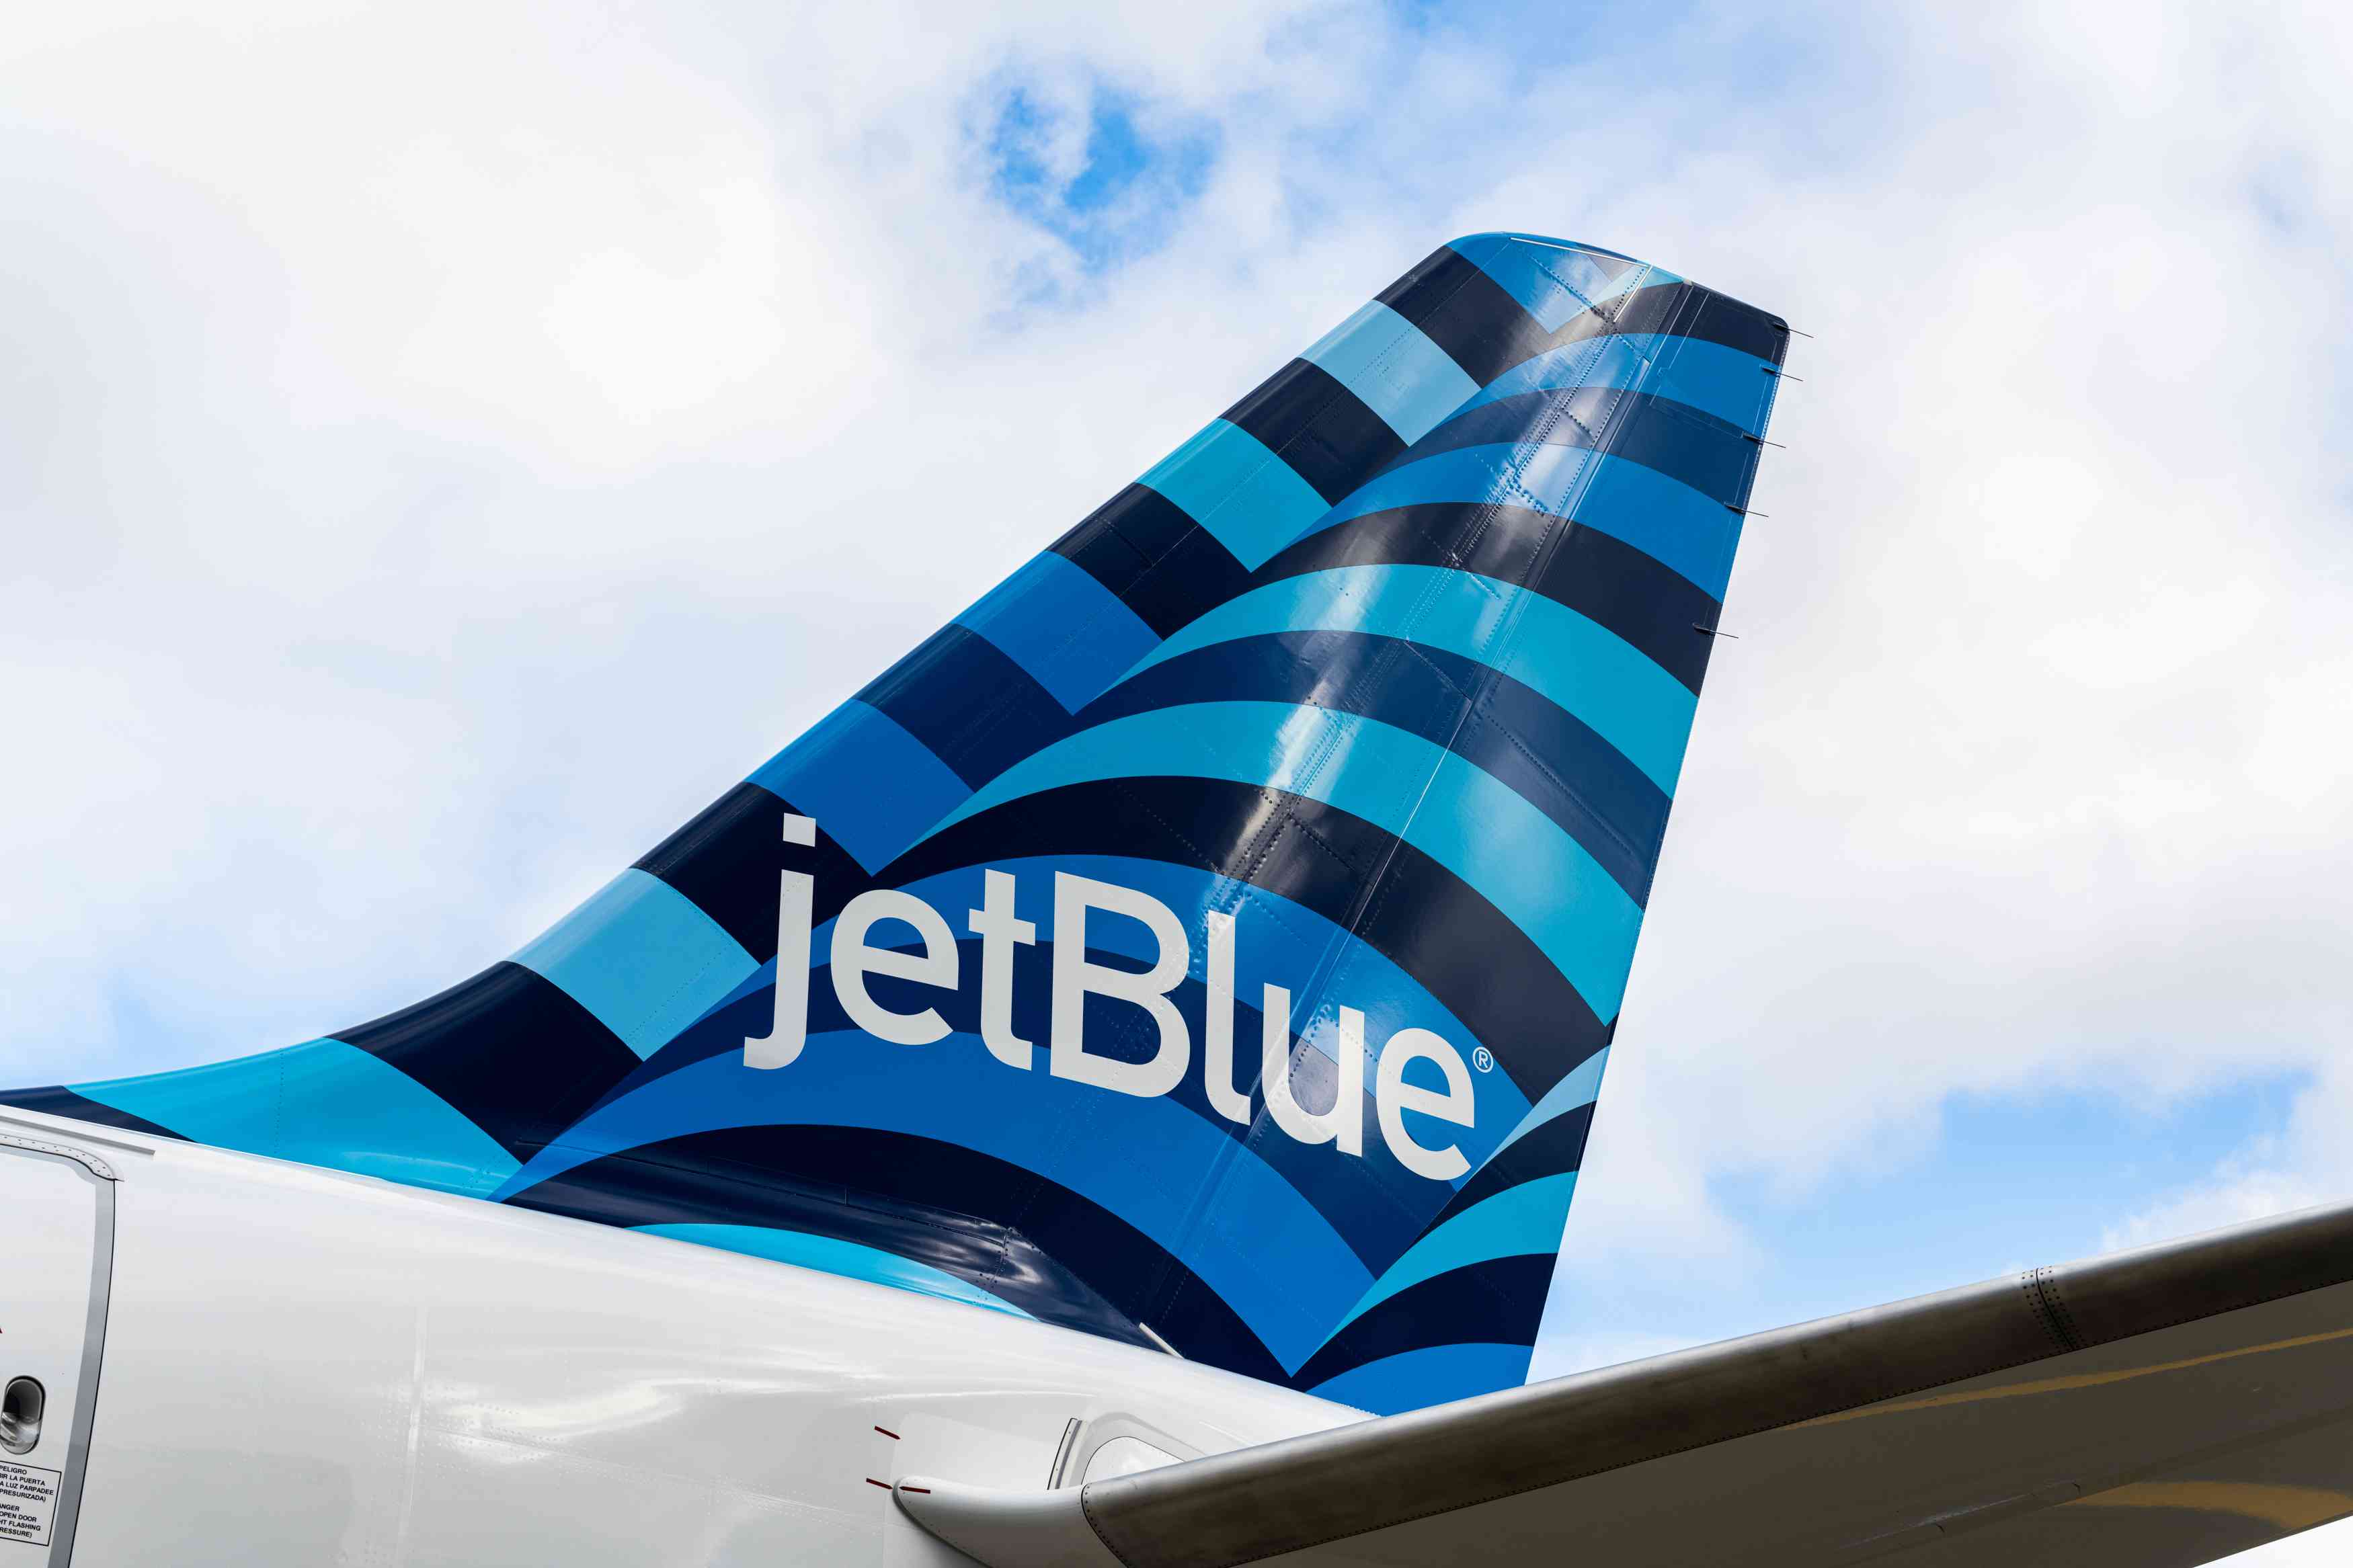 jetblue has flights on sale for as low as $46 — but you'll need to book soon